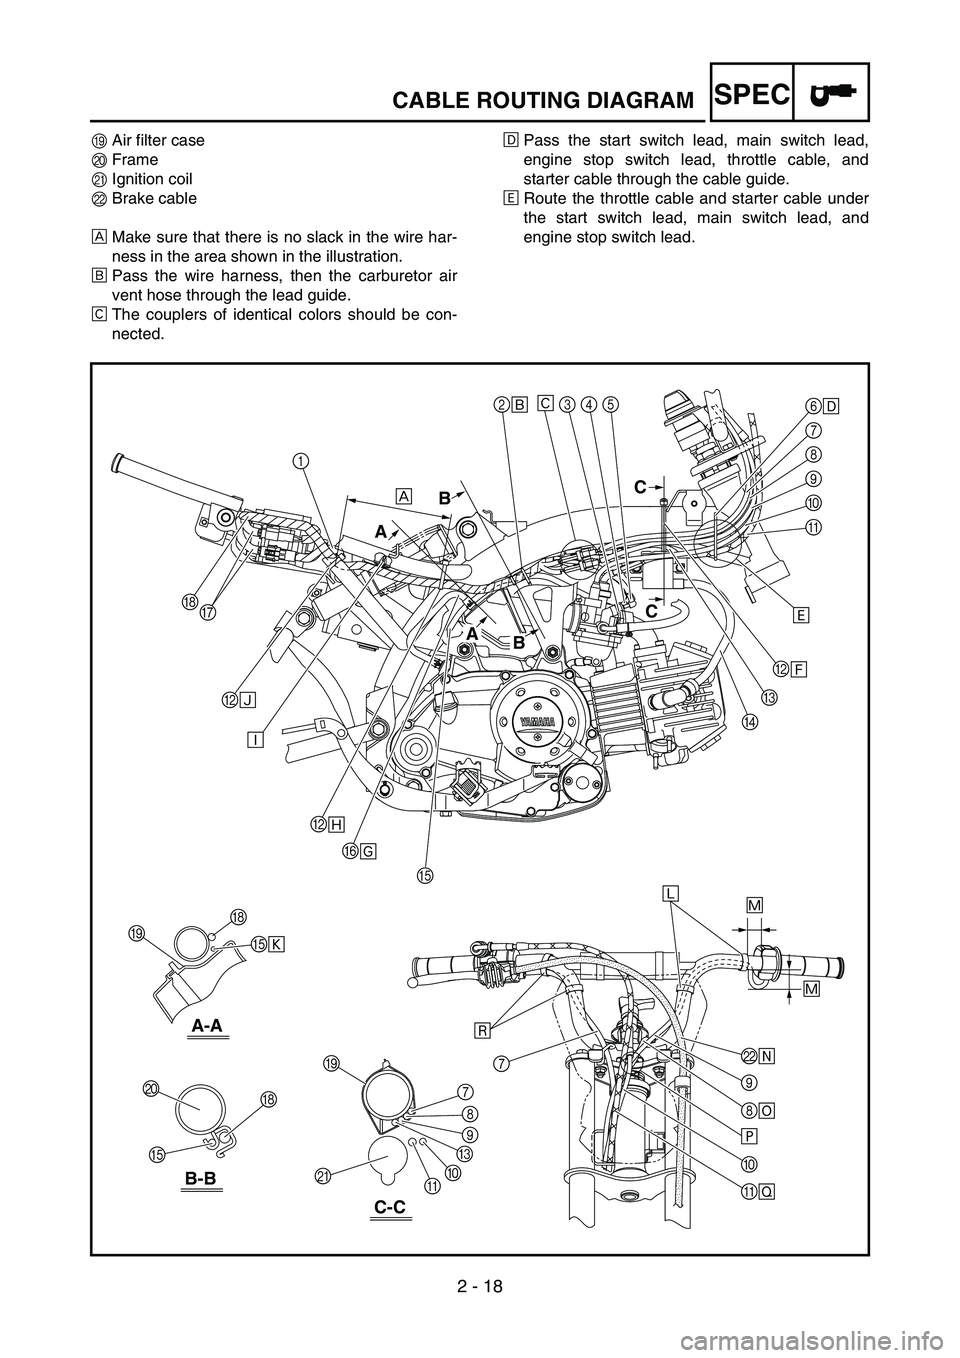 YAMAHA TTR50 2006  Betriebsanleitungen (in German) 
2 - 18
SPECCABLE ROUTING DIAGRAM
IAir filter case
J Frame
K Ignition coil
L Brake cable
È Make sure that there is no slack in the wire har-
ness in the area shown in the illustration.
É Pass the wi